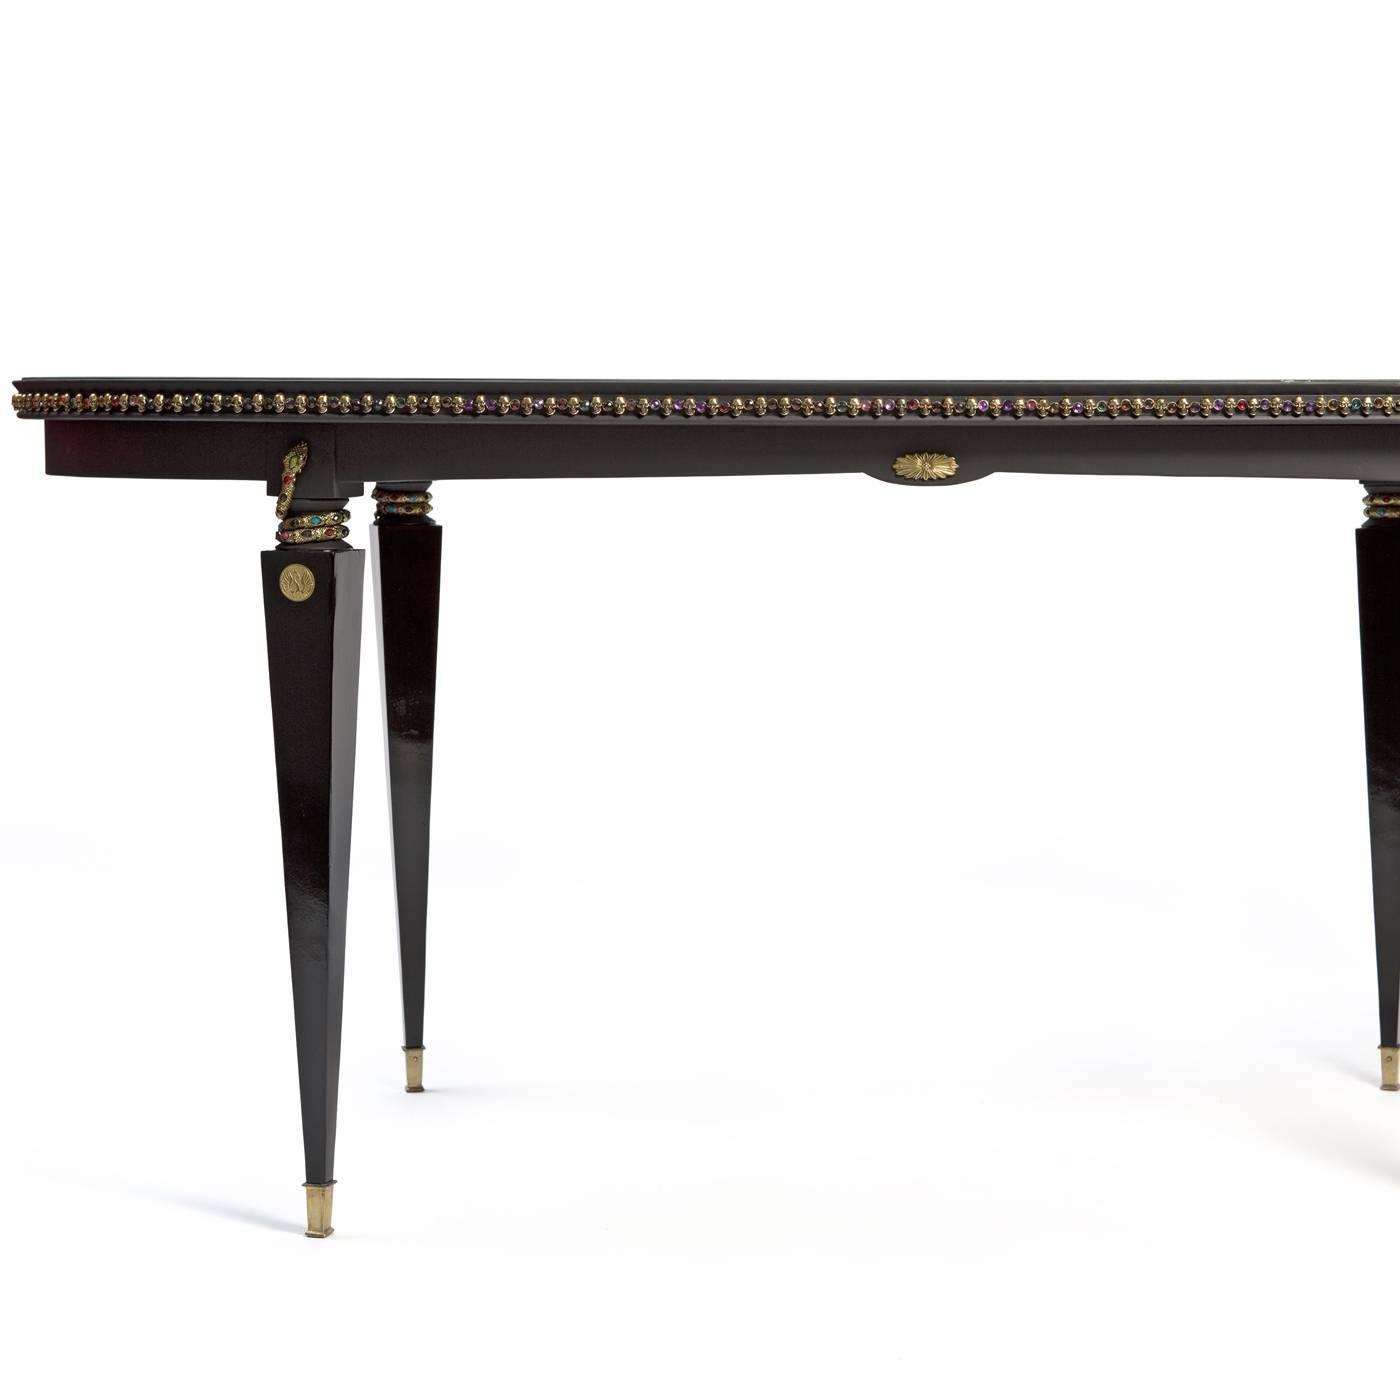 This wooden table was crafted in the 1950s and was restored with luxurious accents, such as the gold lace adorning the top, covered with its original glass panel. The legs are playfully decorated with colorful snakes wrapped around the upper part,